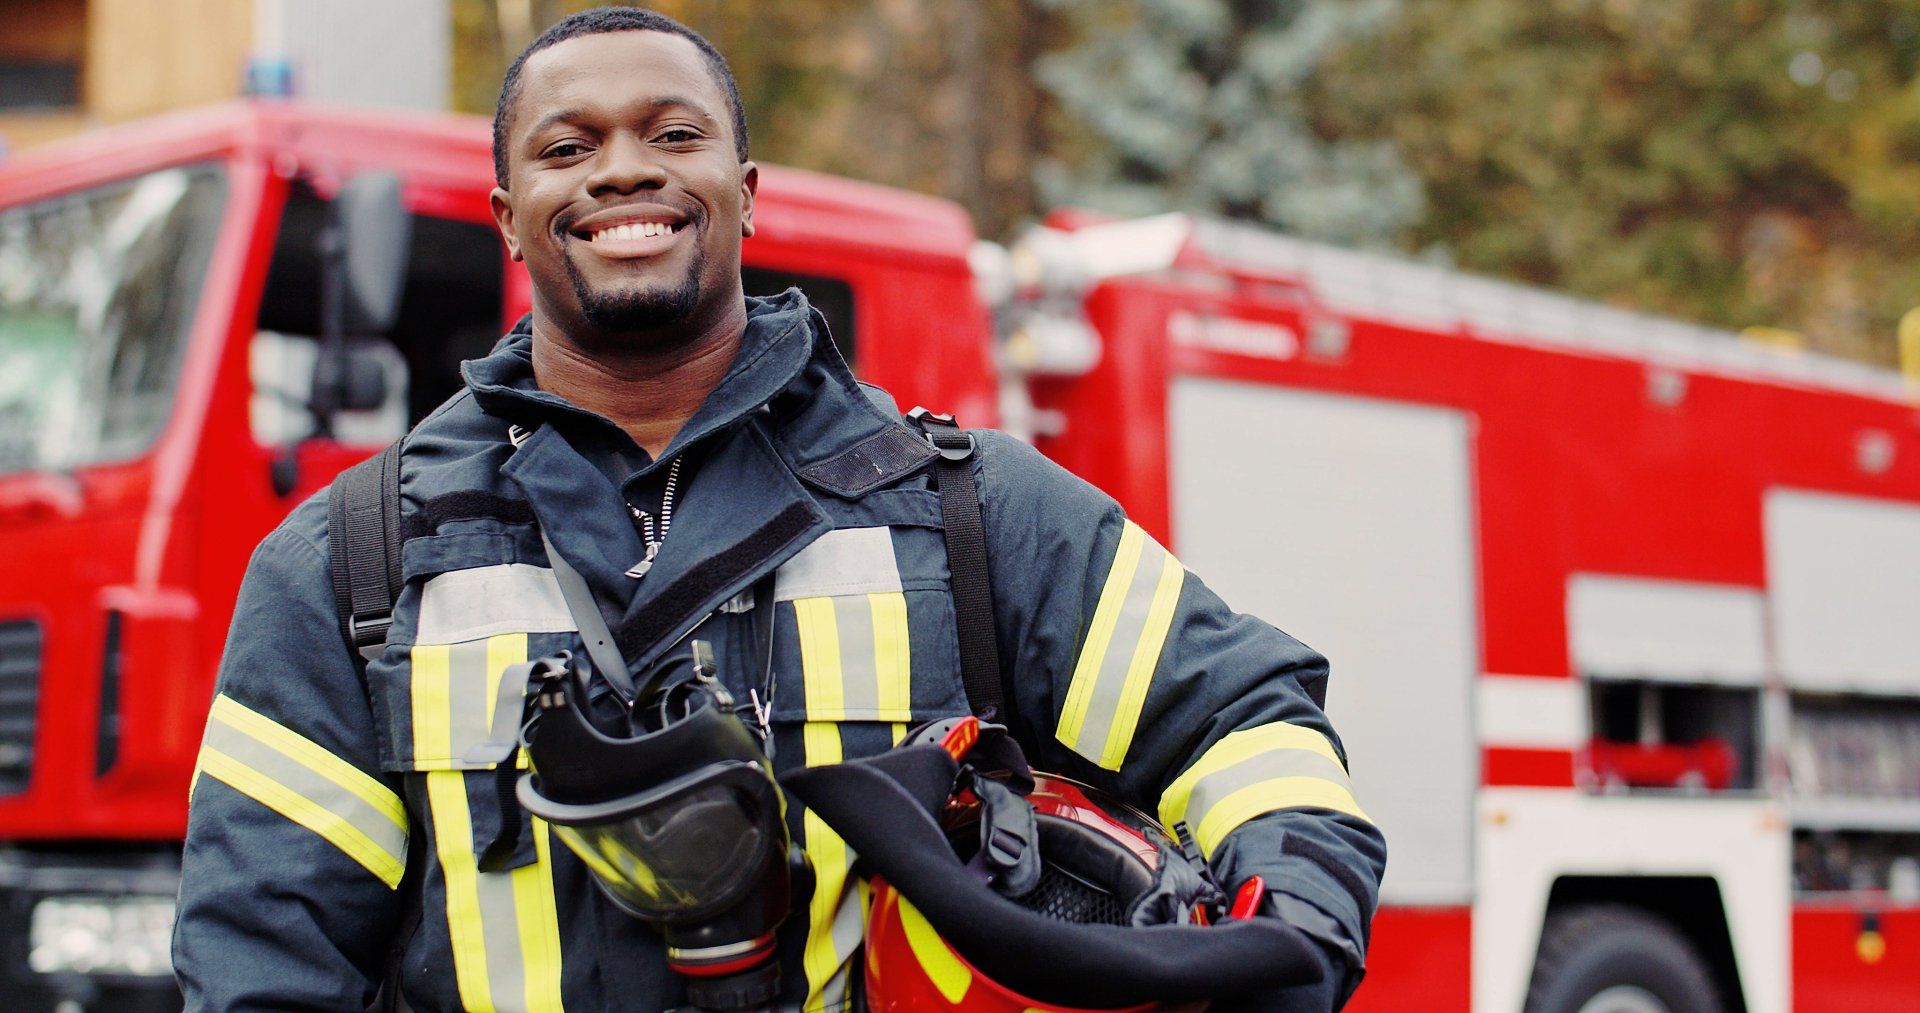 A fireman is standing in front of a fire truck holding a helmet and smiling.